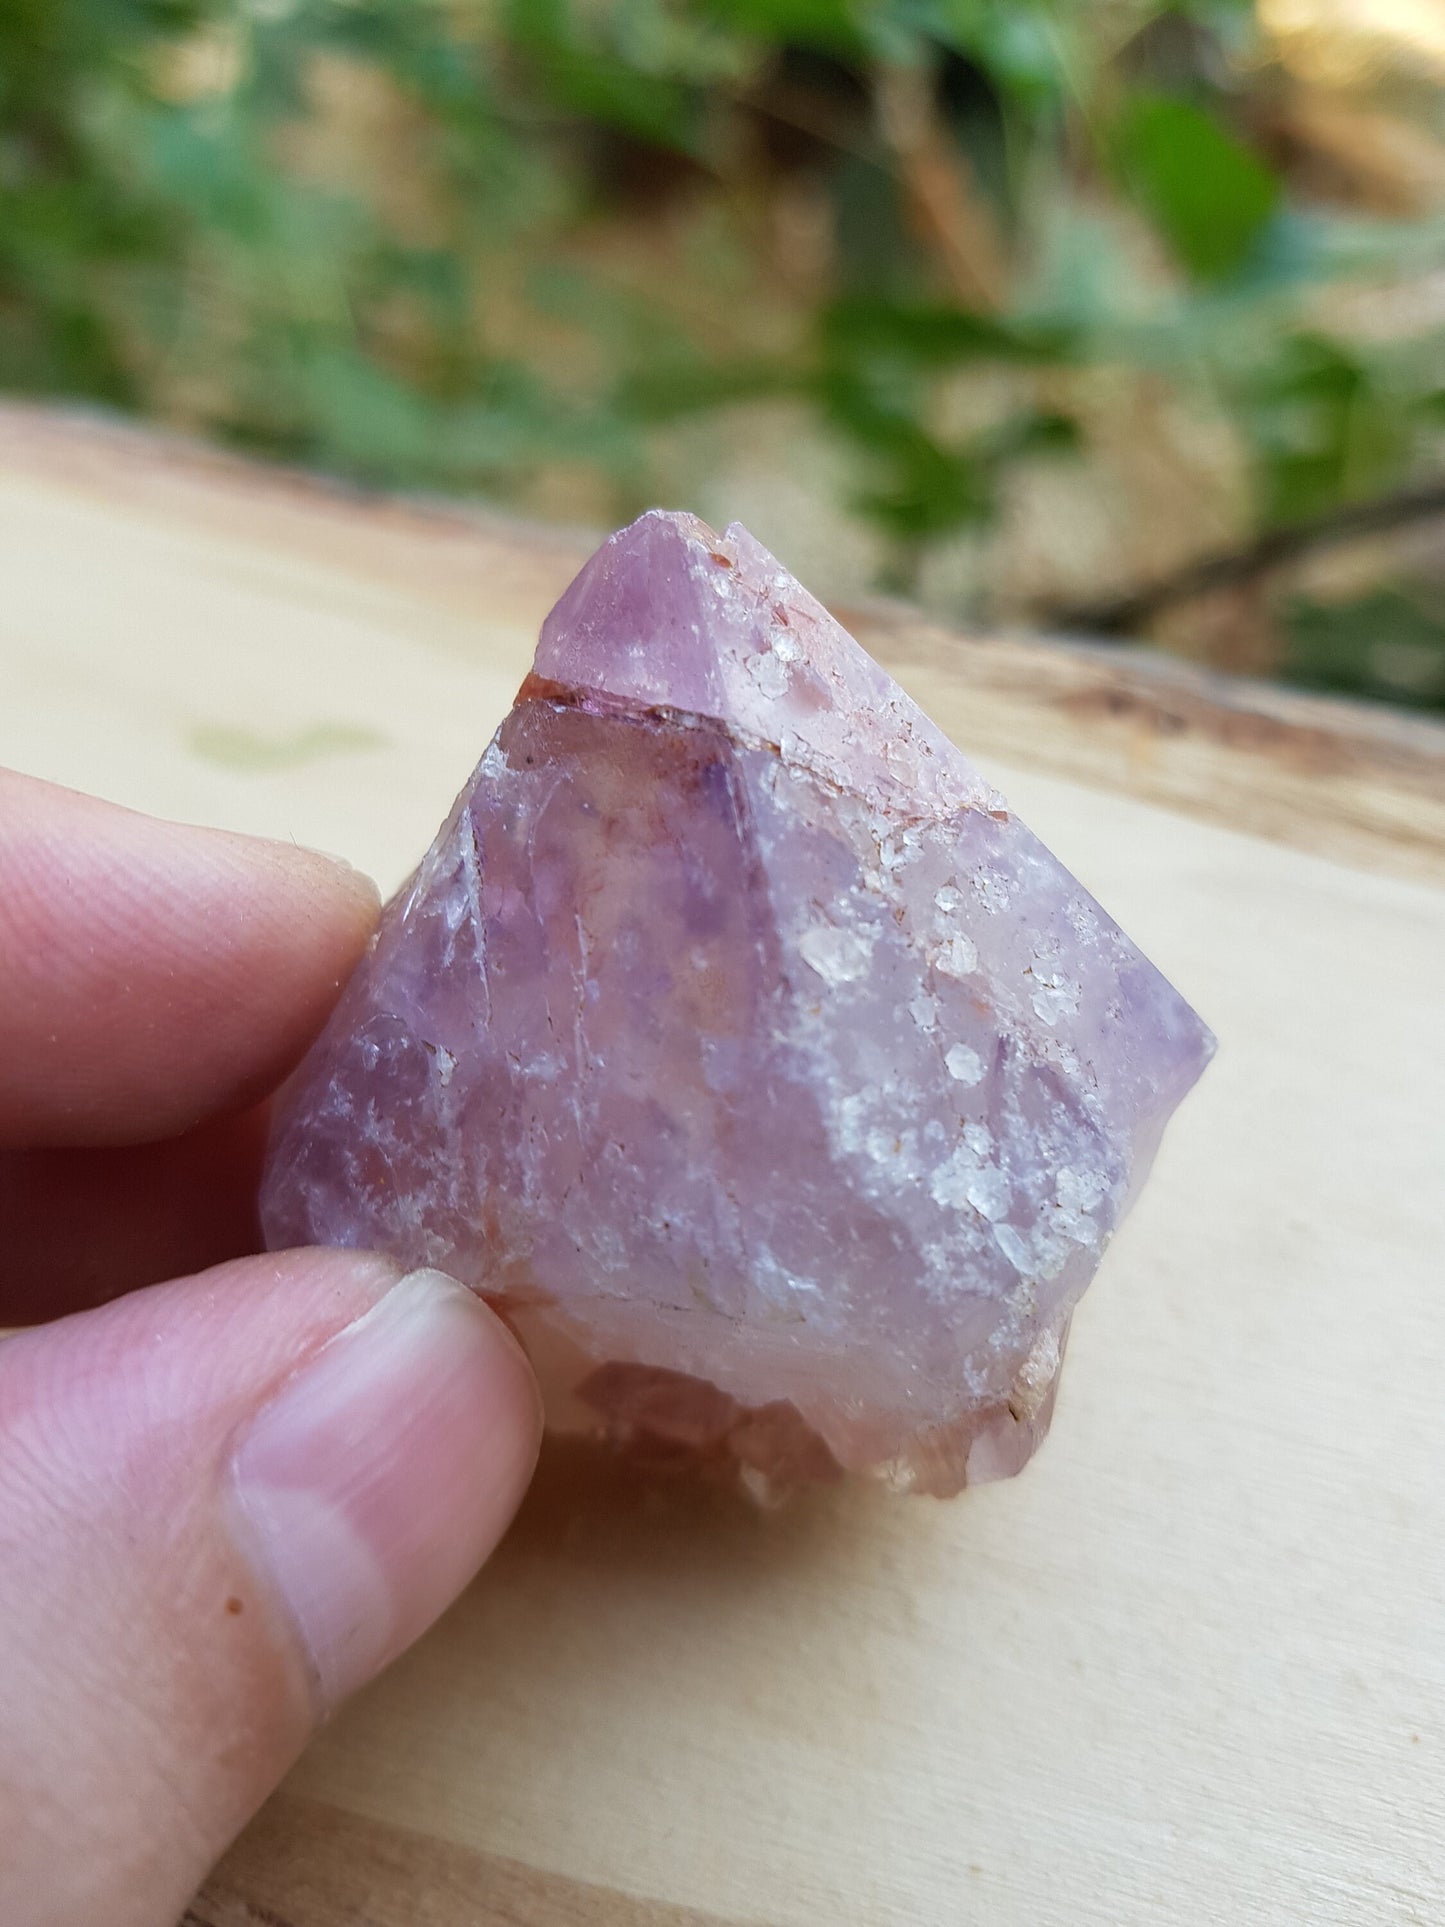 Small Natural Amethyst Crystal Cluster, Healing Crystal, Mineral Specimen, Mineral Collection